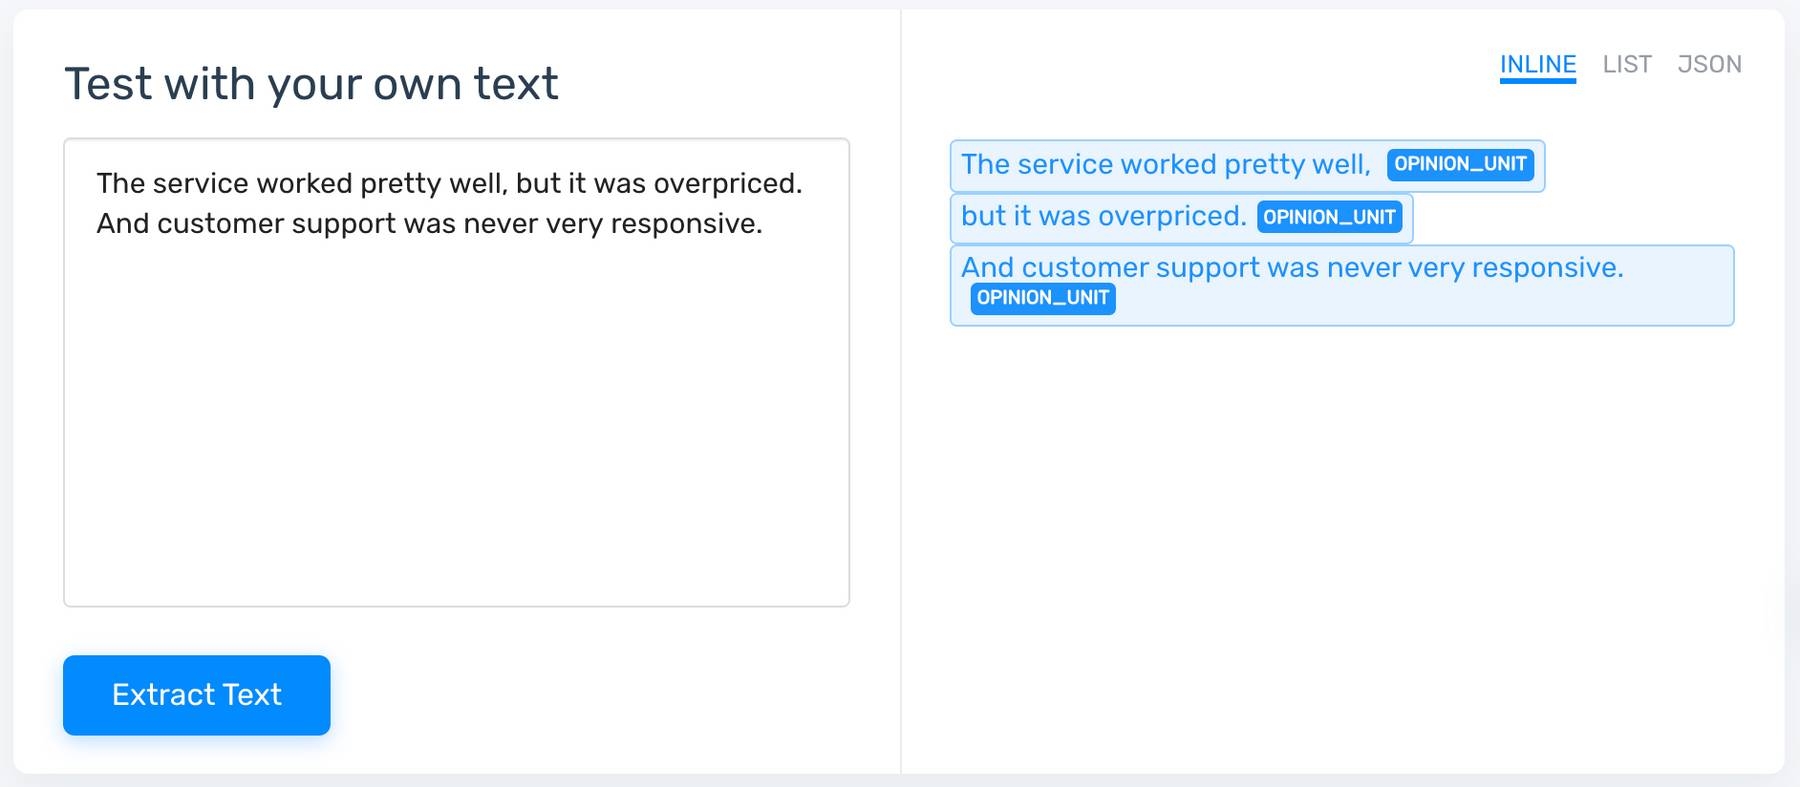 Opinion unit extractor breaking the following comment into three separate opinion units: 'The service worked pretty well, but it was overpriced. And customer support was never very responsive.'